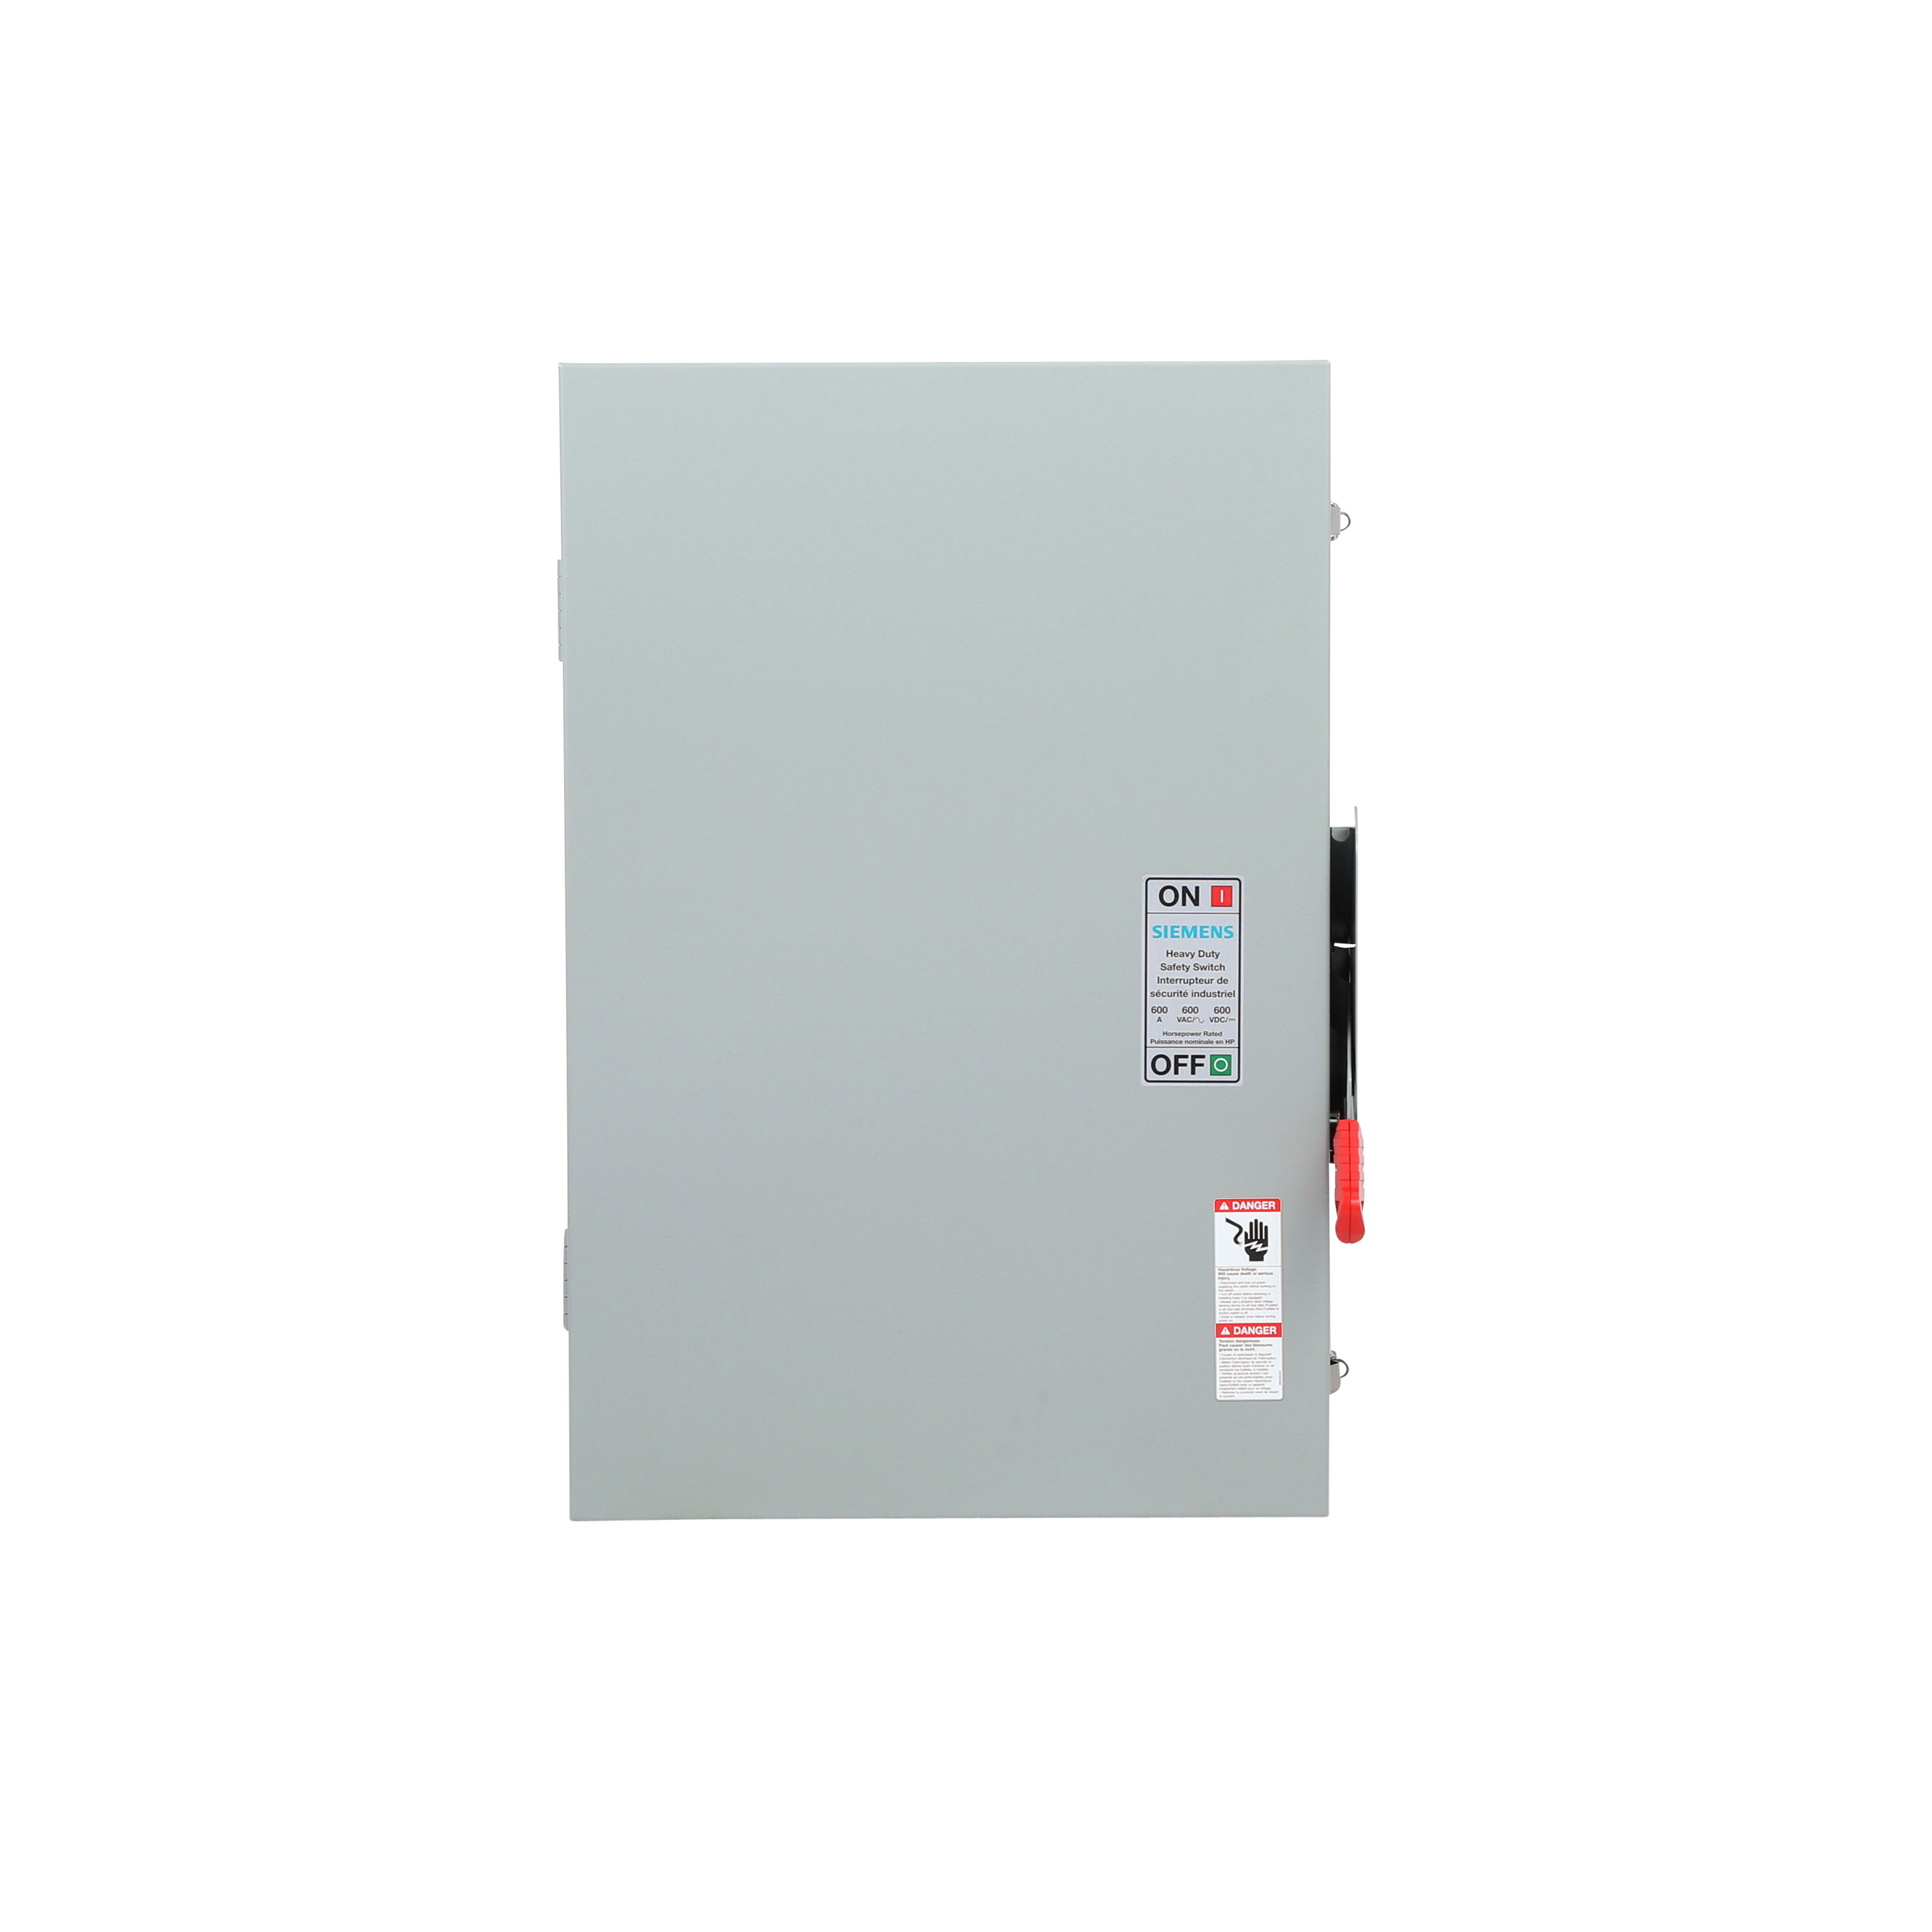 Siemens Low Voltage Circuit Protection Heavy Duty Safety Switch. 3-Pole Non-Fused in a type 3R enclosure (outdoor). Rated 600VAC (600A).